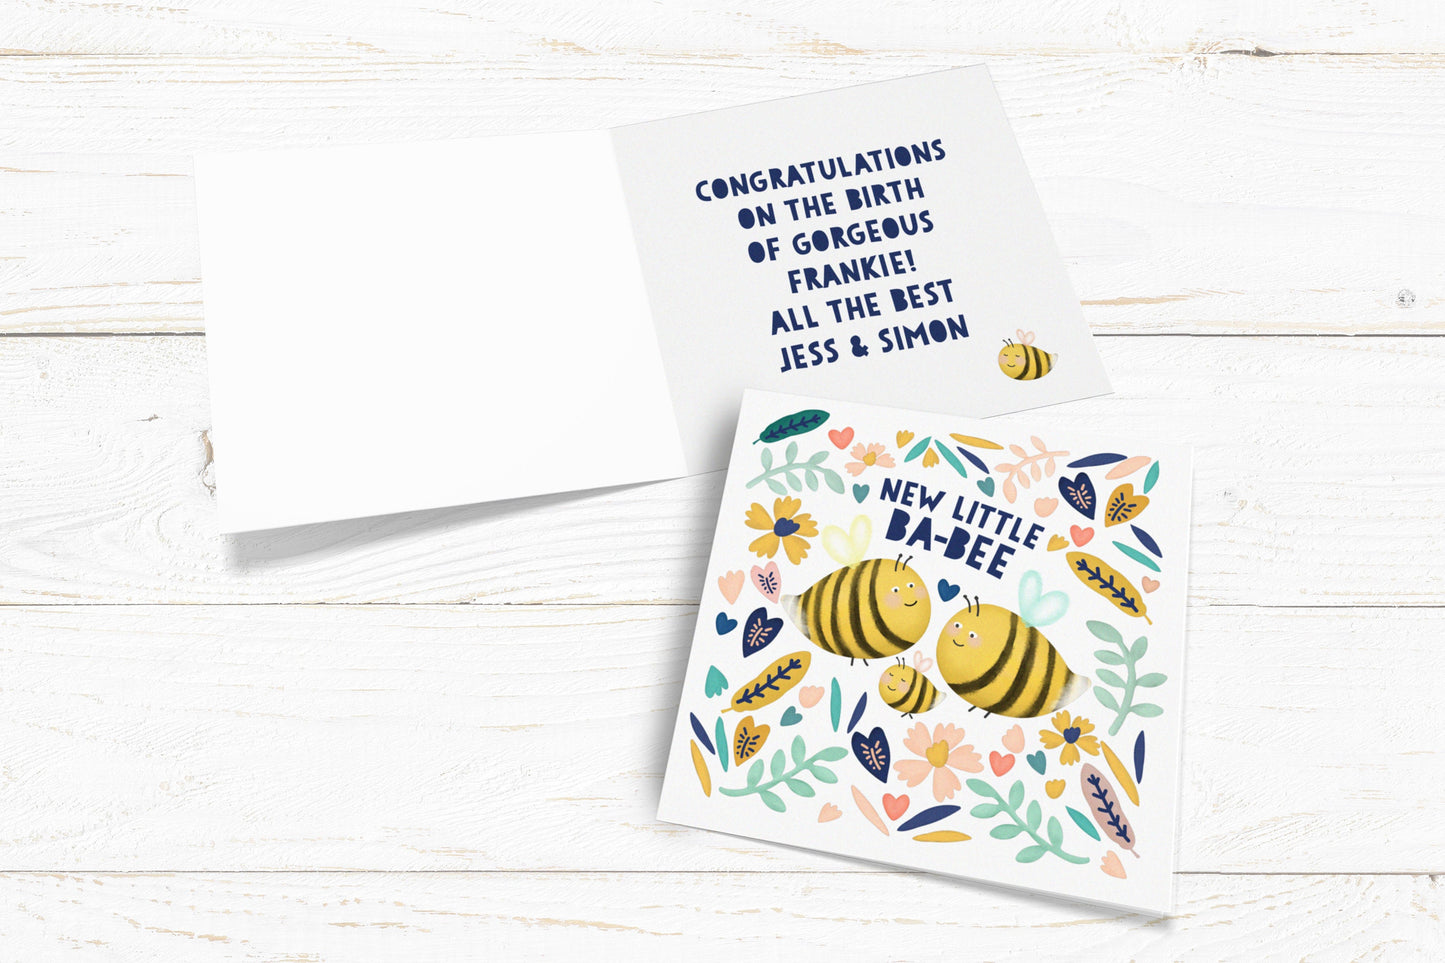 New Baby Bee Card. Personalised New Baby Card. Born on Card. Birth Celebration Card. Cute Bee Card. Send Direct Option.